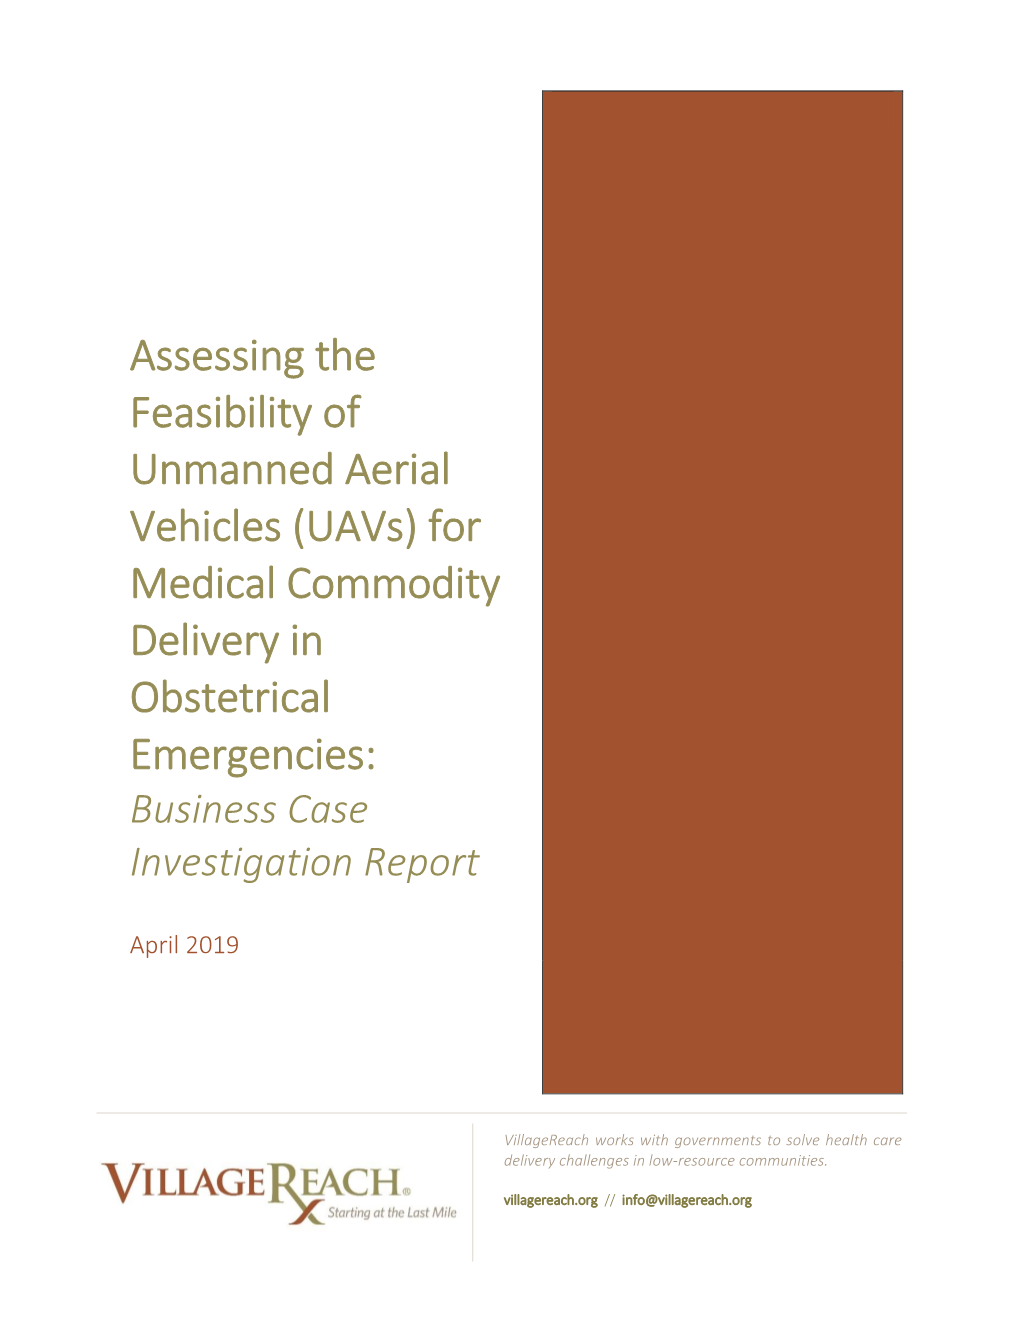 Assessing the Feasibility of Unmanned Aerial Vehicles (Uavs) for Medical Commodity Delivery in Obstetrical Emergencies: Business Case Investigation Report